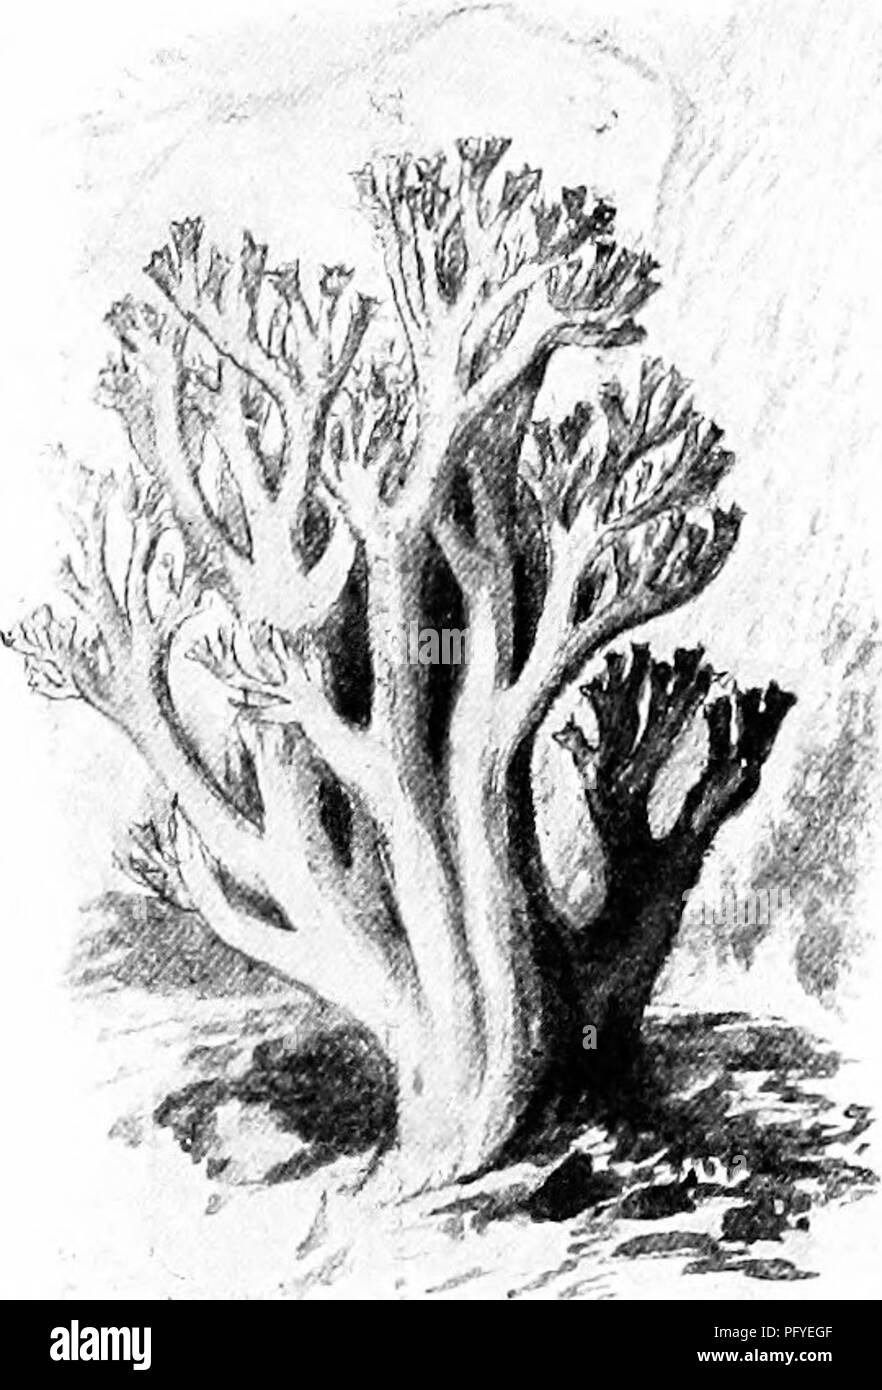 . A text-book of botany for secondary schools. Botany. Fig. 150.—Mushroom with spine-hke Fig. 151.—The common edible coral processes instead of gills. — After fungus.—After Gibson. Gibson. that attack forest-trees. The mycelium usually spreads between the bark and the wood, sending special absorbing branches into the wood, often even into the heart wood, causing decay and weakening of the stem. The spore- bearing structures are sent to the surface, and appear as toadstools, bracket Fungi, etc. Spores are produced in great profusion and infect other trees, the new mycelium using wounds to effec Stock Photo